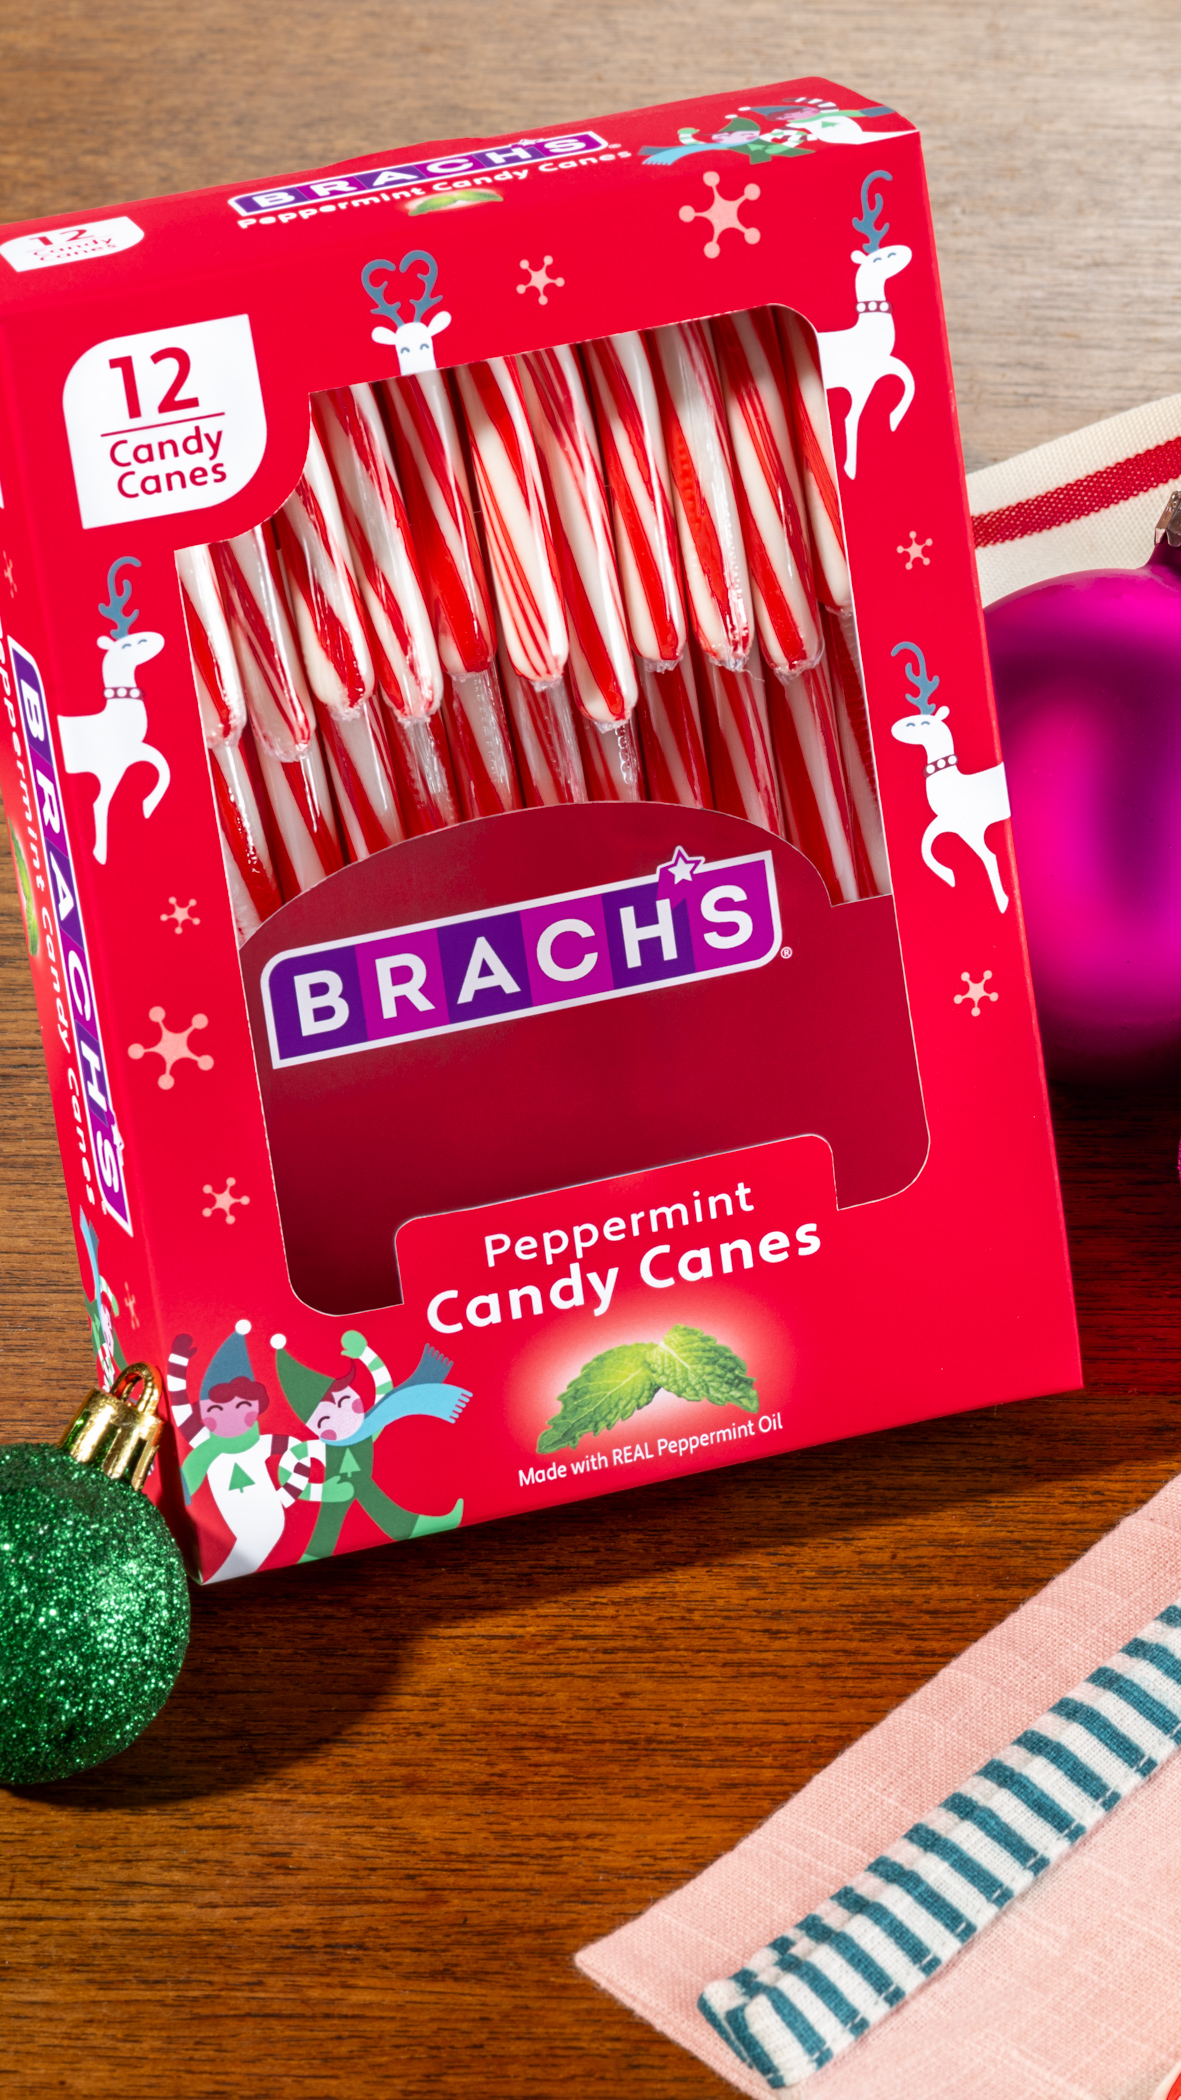 Brach's Is Coming Out With 'ELF' Candy